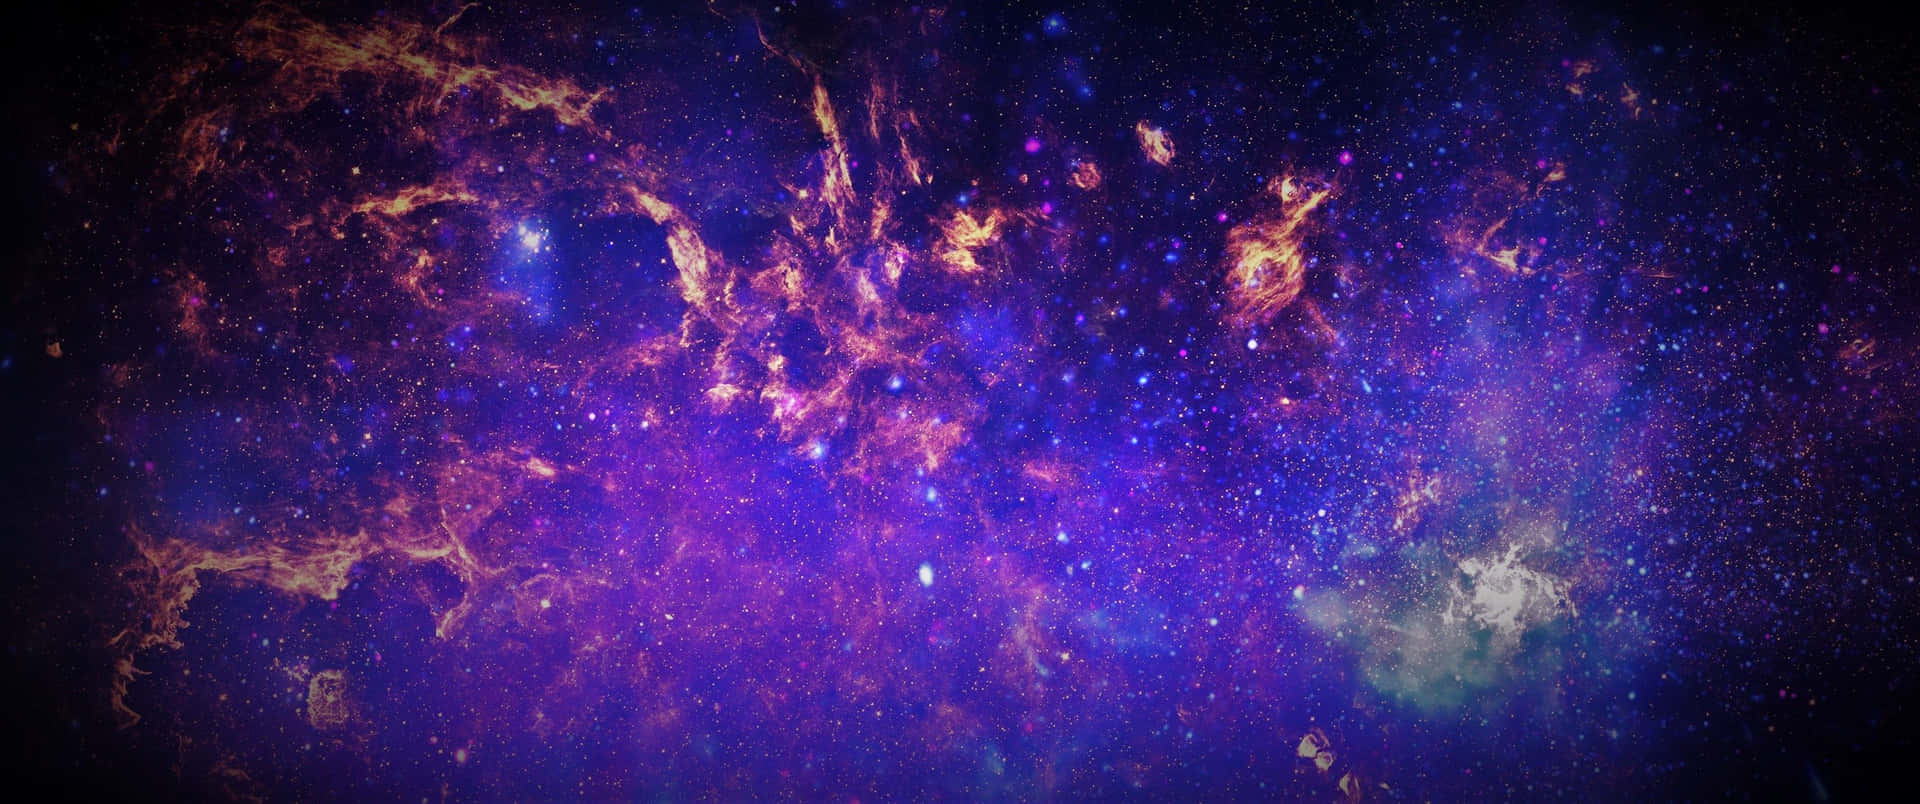 A vast expanse of the Milky Way Galaxy with numerous stars and nebulae Wallpaper